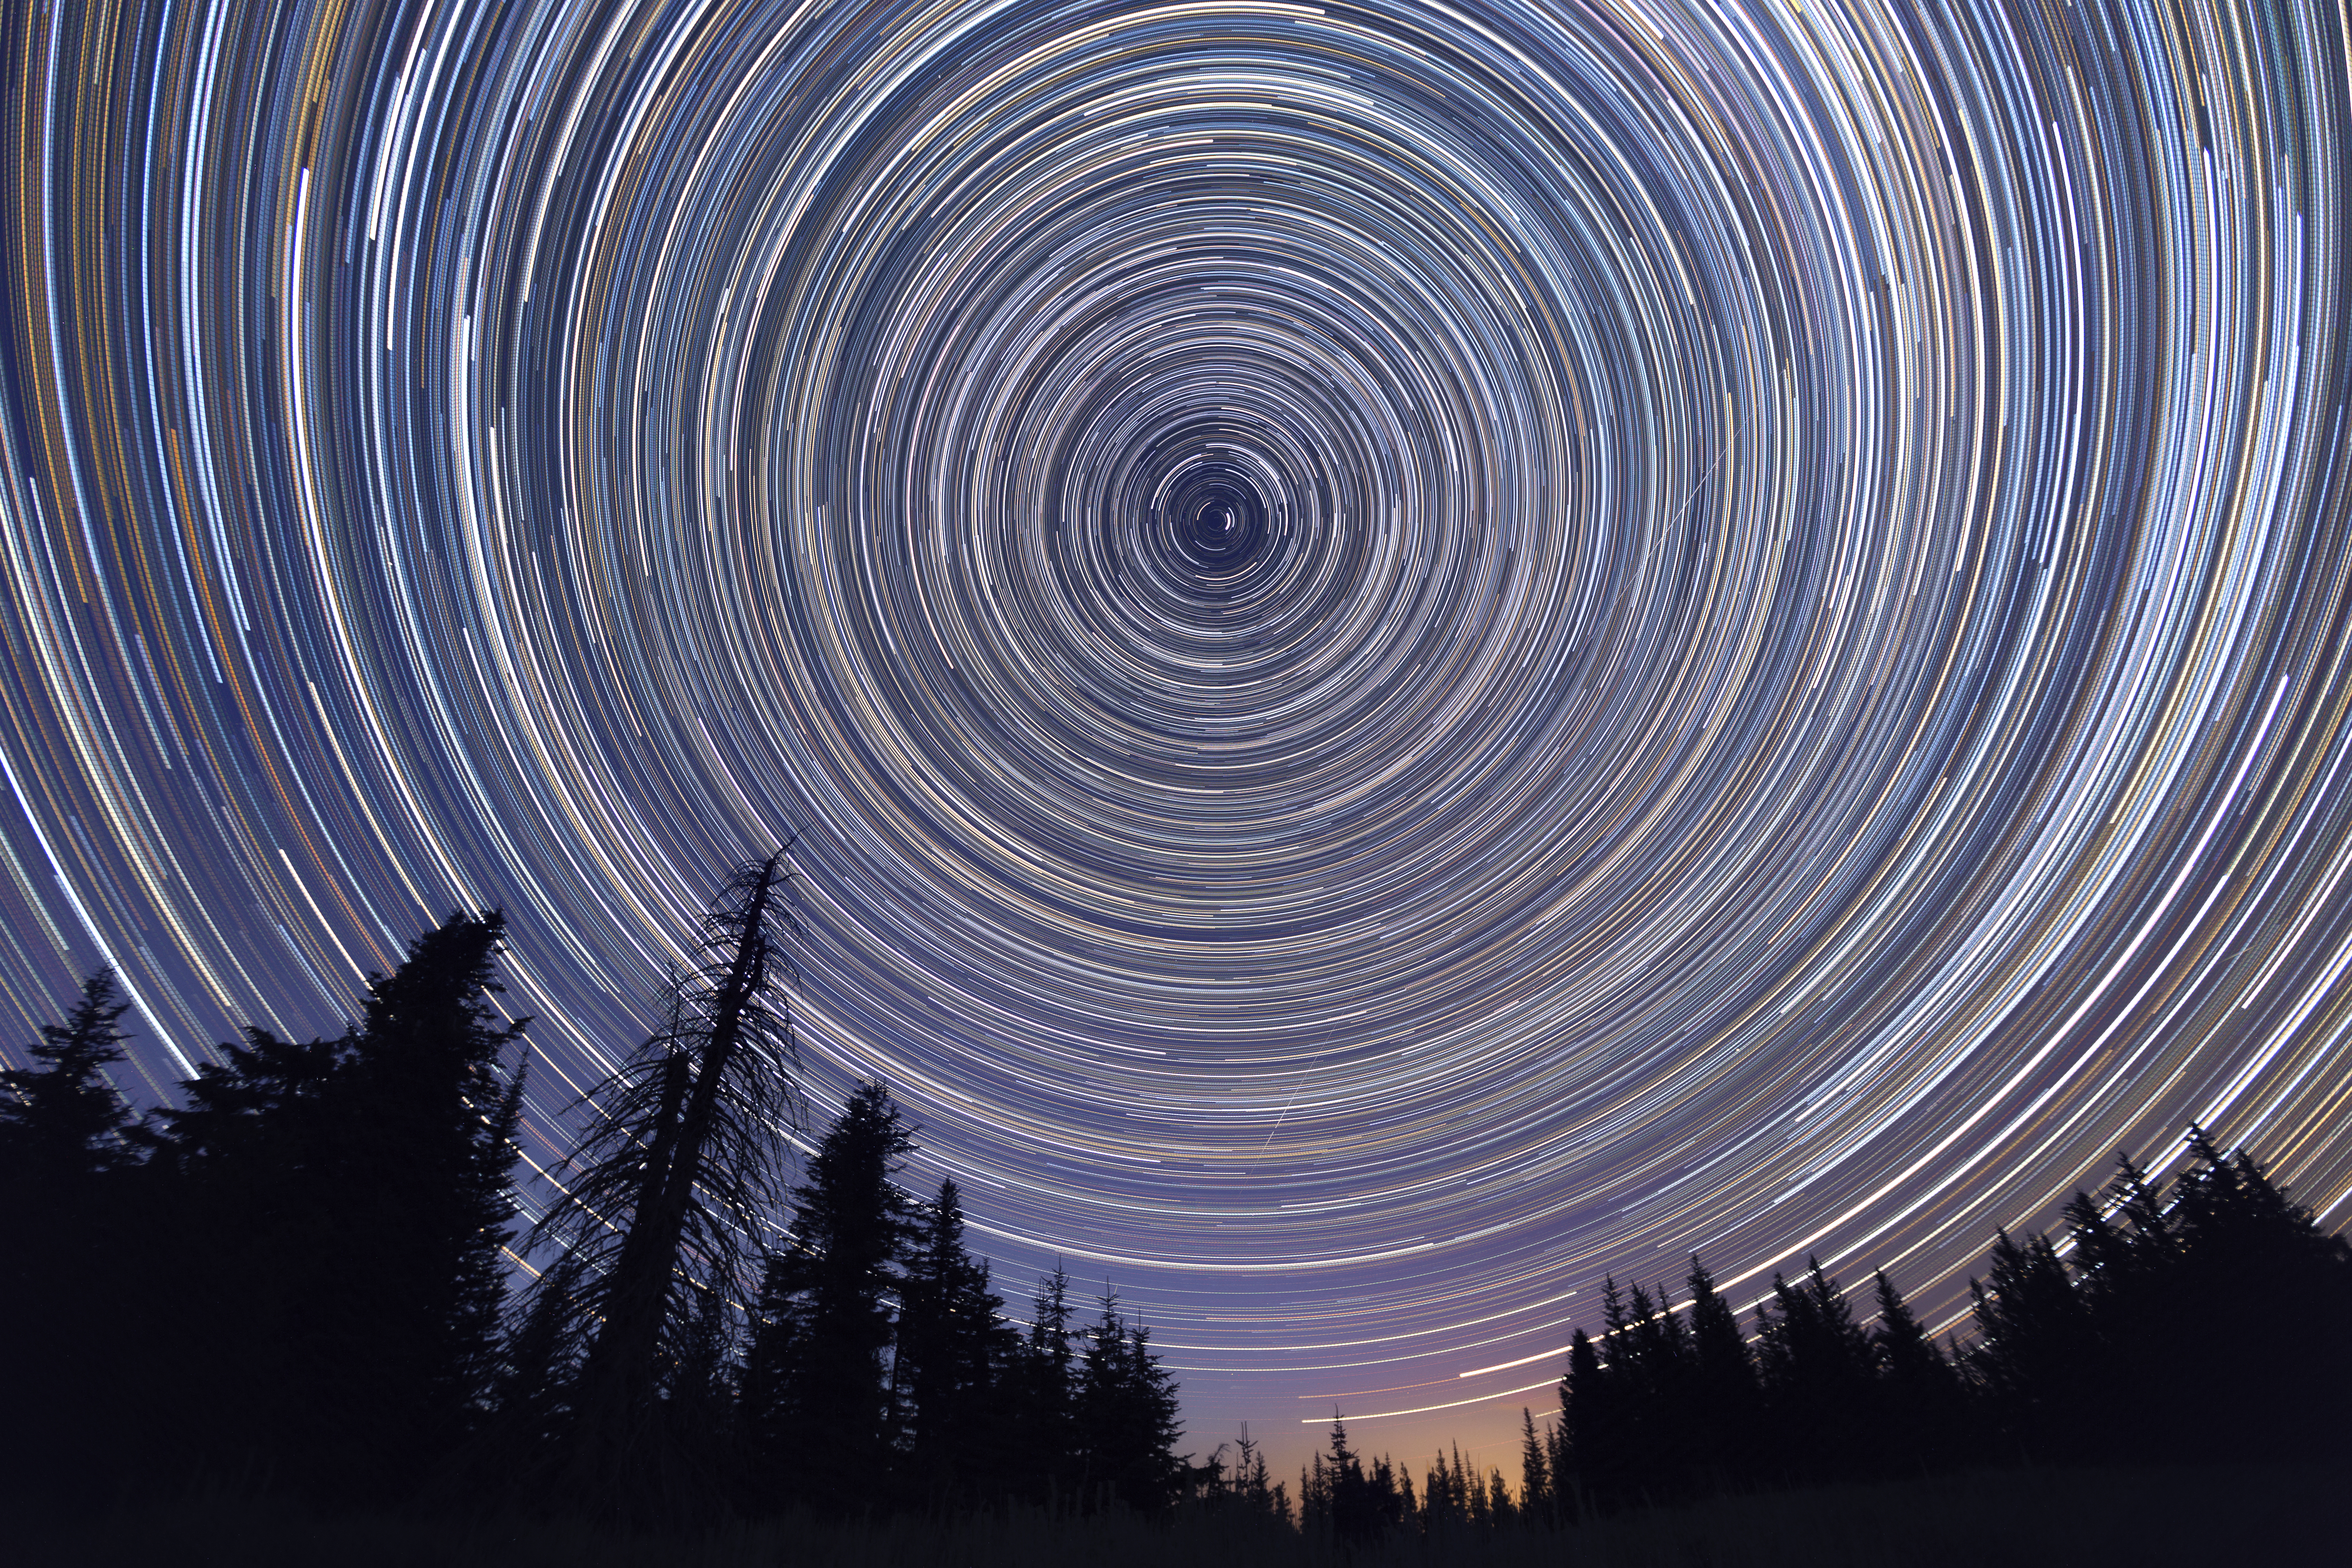 A long-exposure photo of stars in rotation over a forest, giving the effect of concentric circles of light.